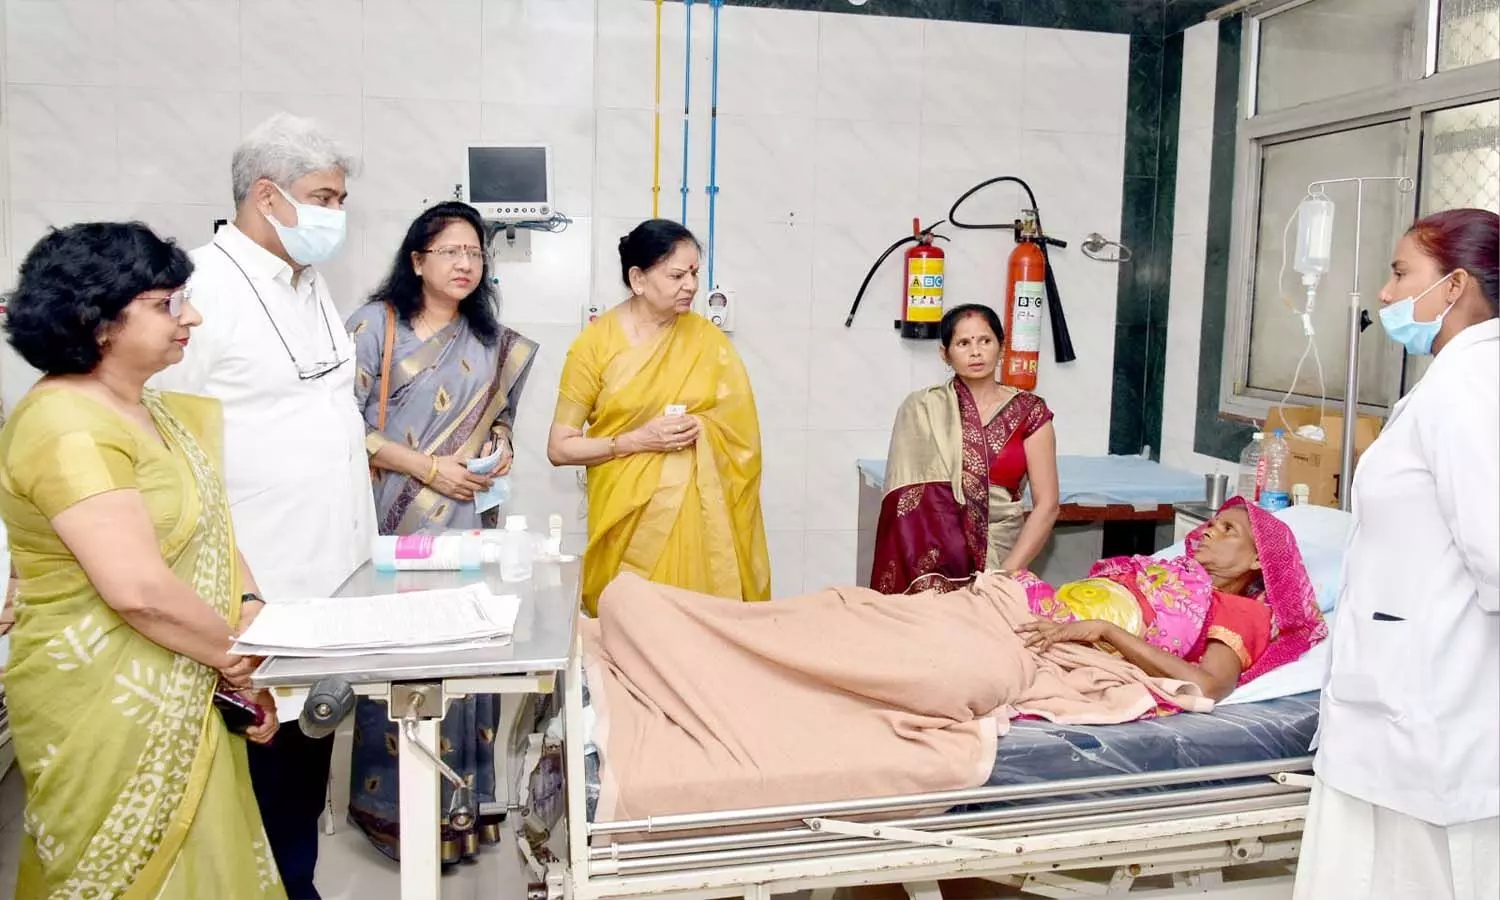 The Chairperson of the Womens Commission inspected the Lohia Institute and the Mother and Child Referral Hospital